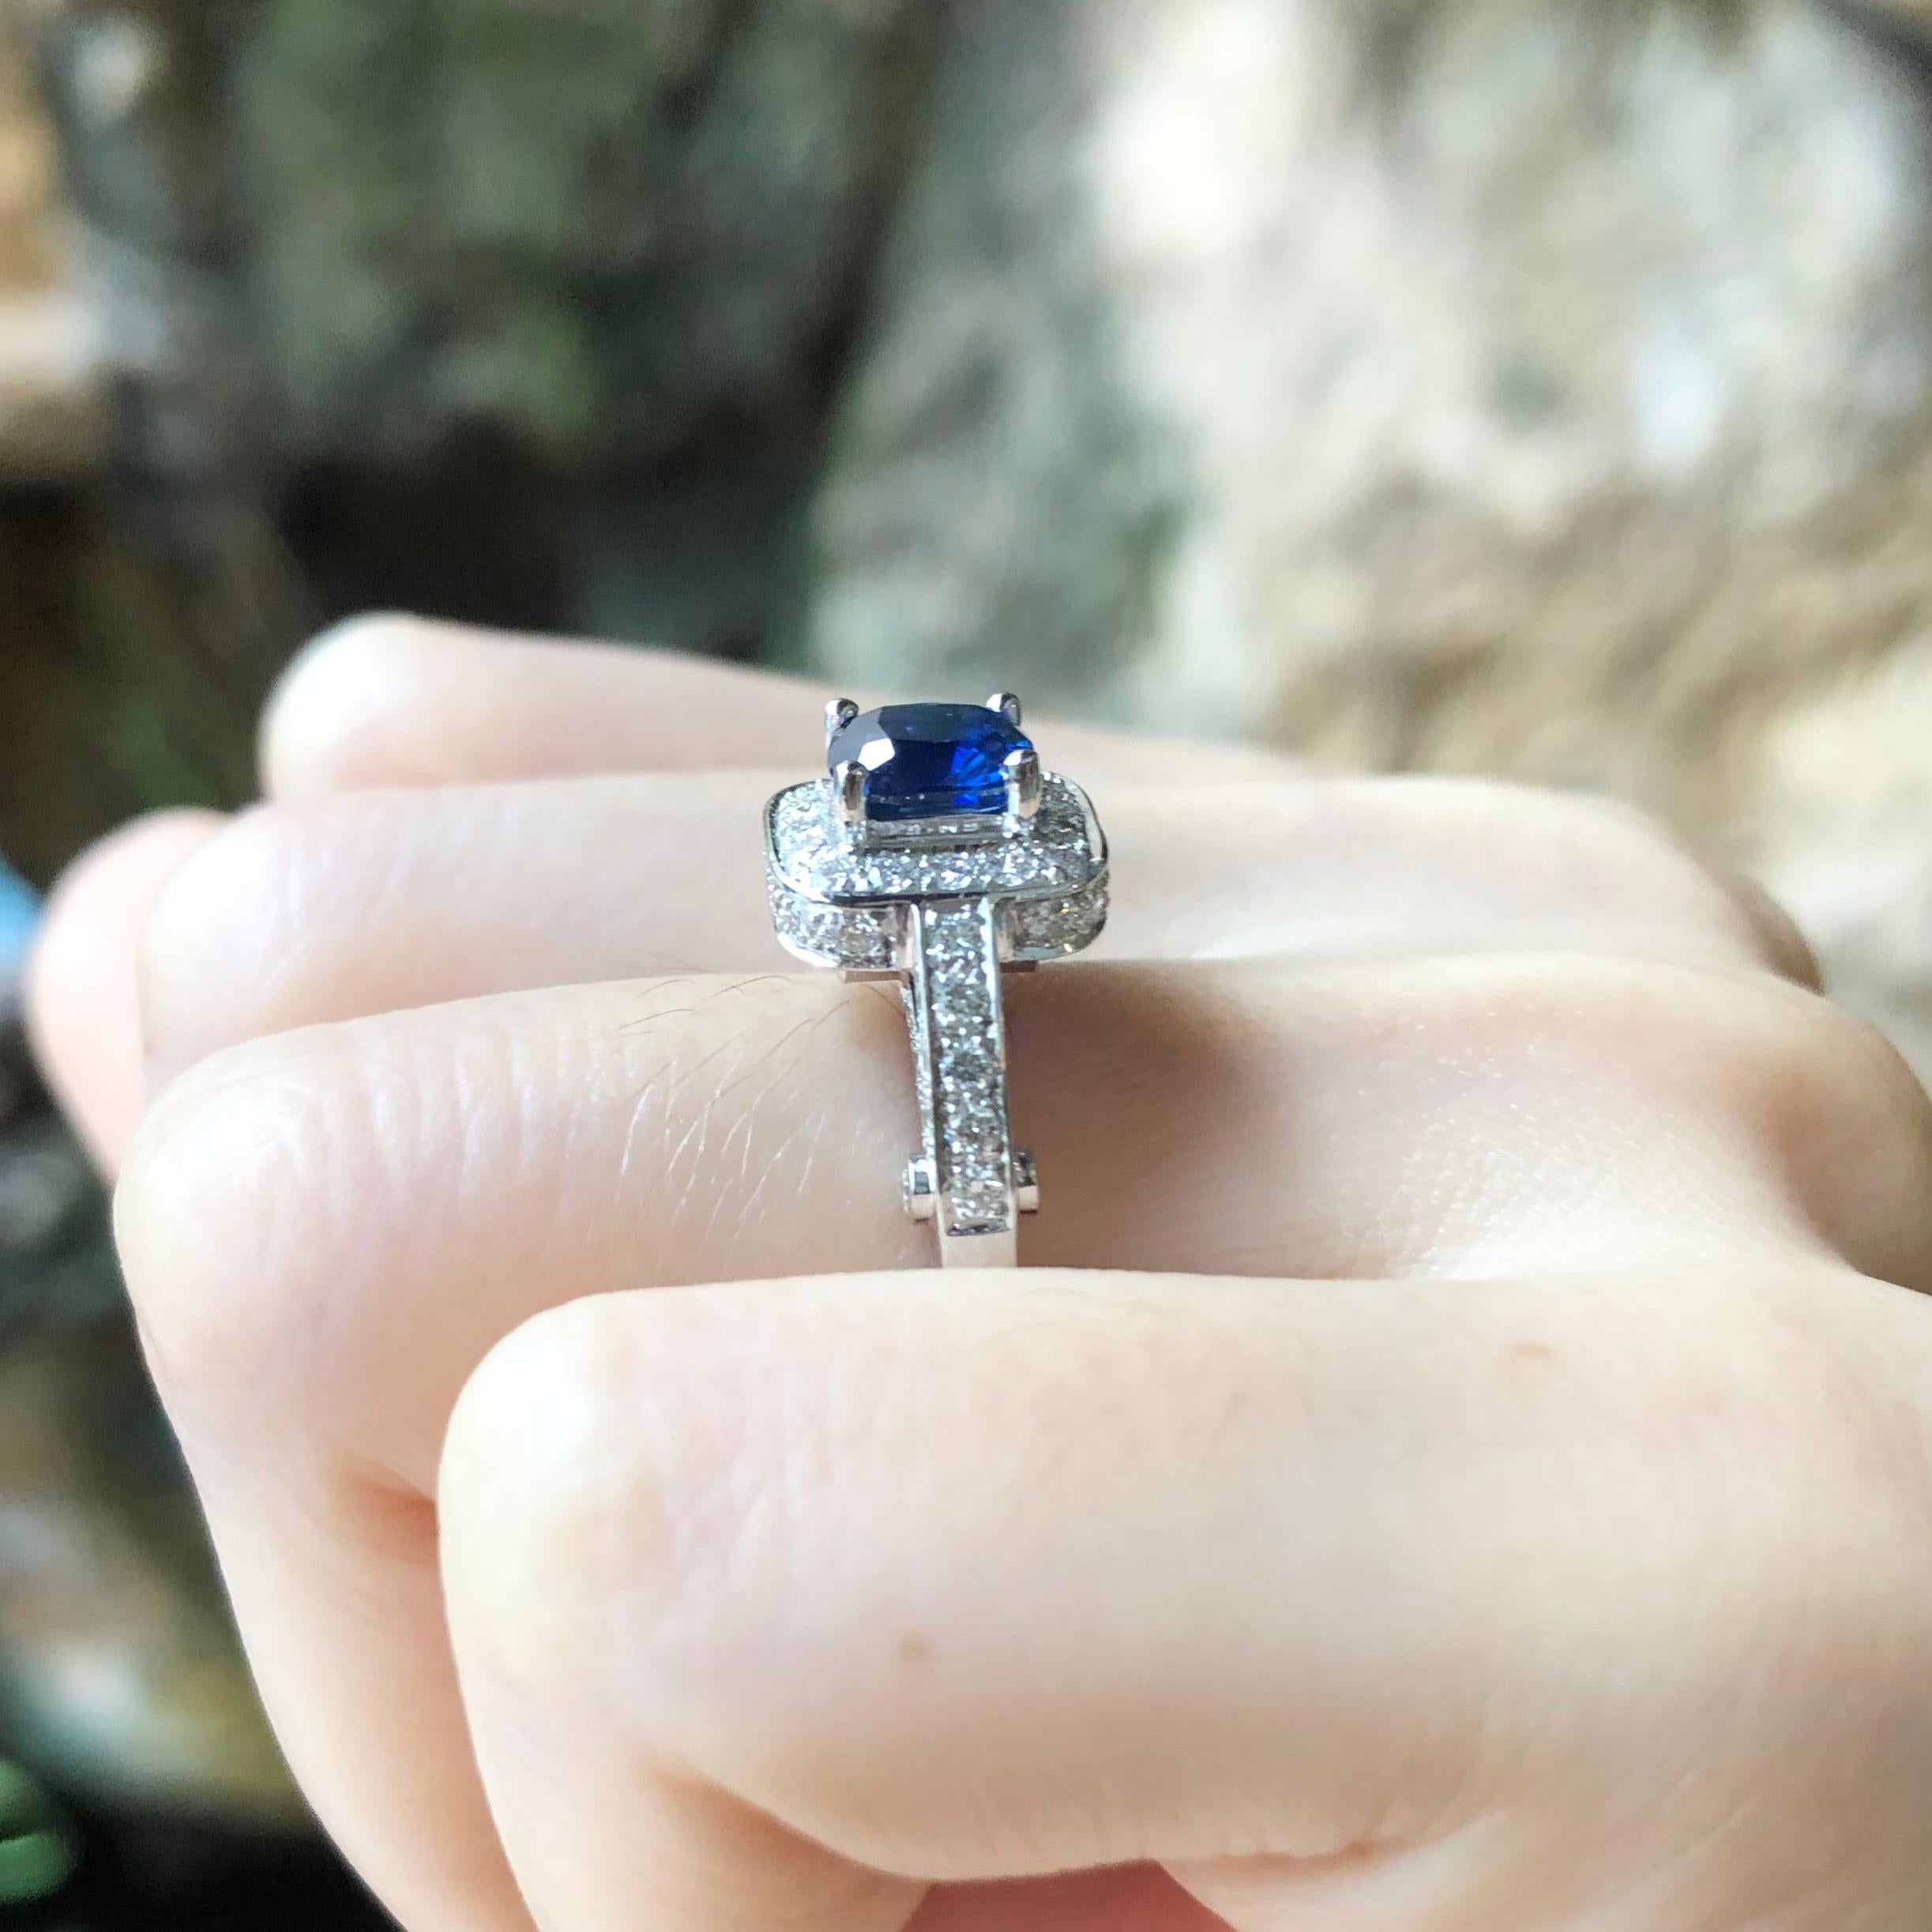 Blue Sapphire 1.20 carats with Diamond 0.85 carat Ring set in 18 Karat White Gold Settings
(GIT Certified, The Gem and Jewelry Institute of Thailand)

Width:  1.3 cm 
Length: 1.1 cm
Ring Size: 52
Total Weight: 8.06 grams

Blue Sapphire 
Width:  0.6